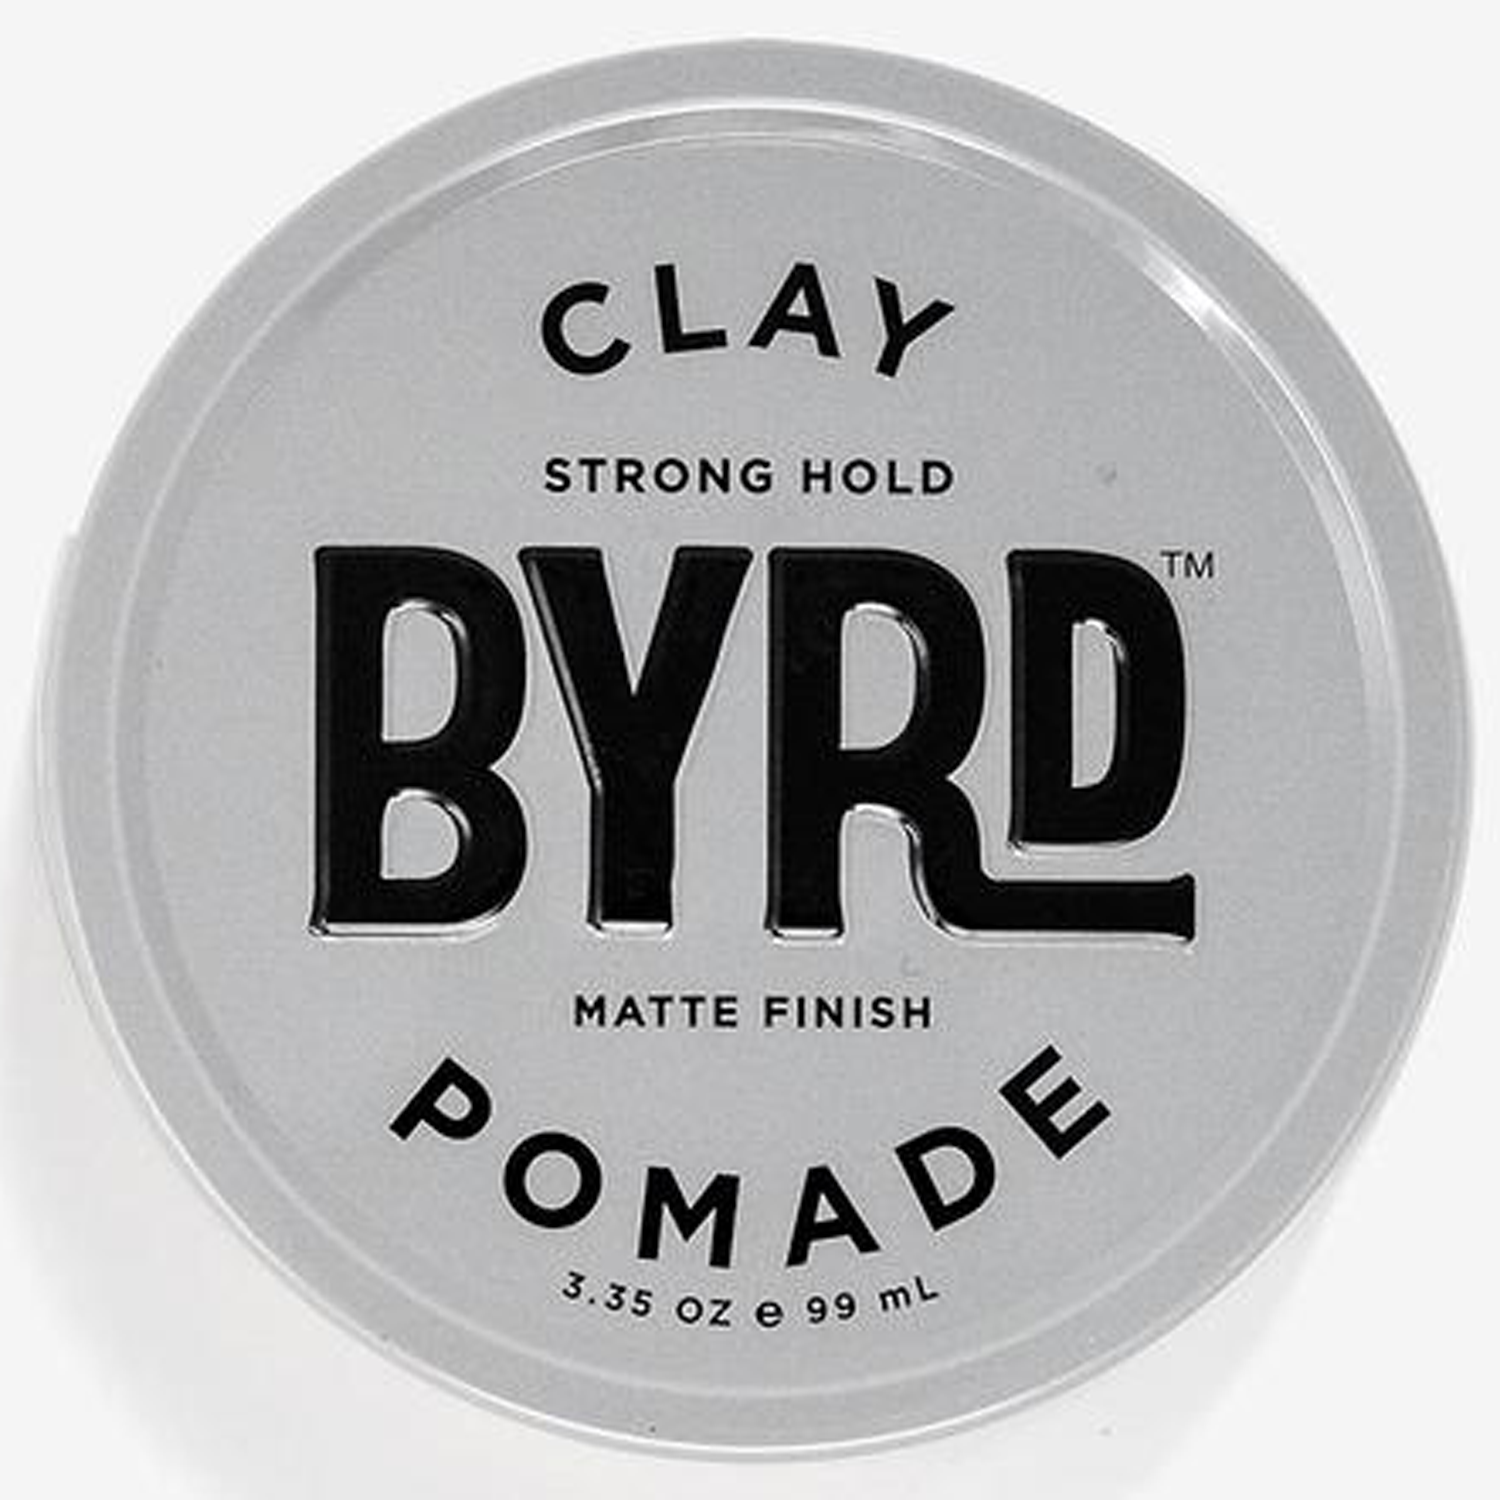 Byrd - Clay Pomade 99ml | Strong Hold, Matte Finish Pomade - Orcadia